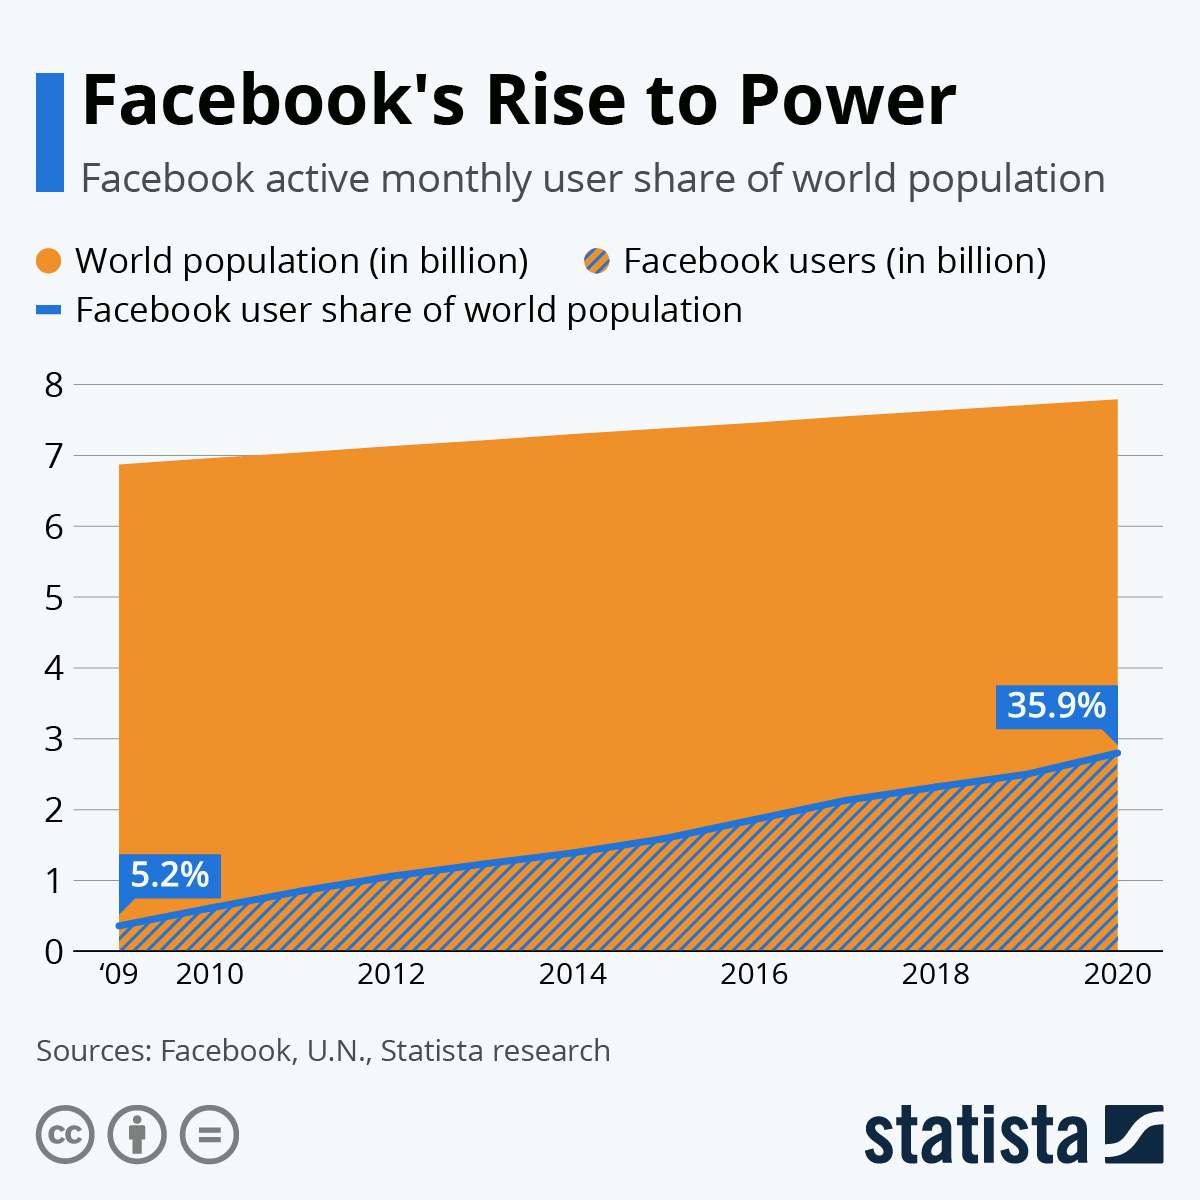 Facebook's Rise to Power